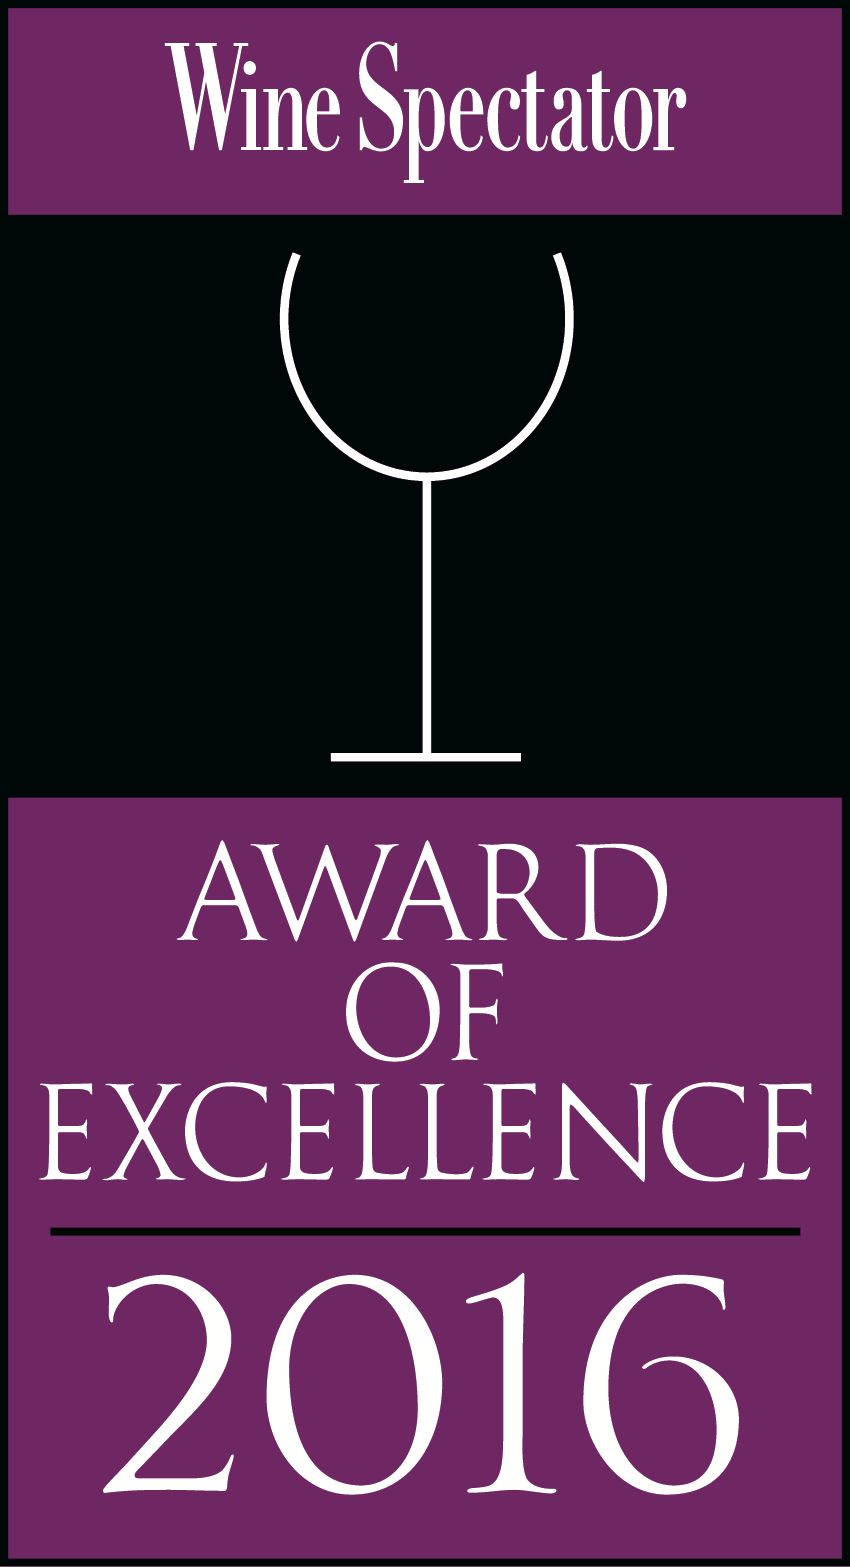 Wine Spectator Award of Excellence 2016